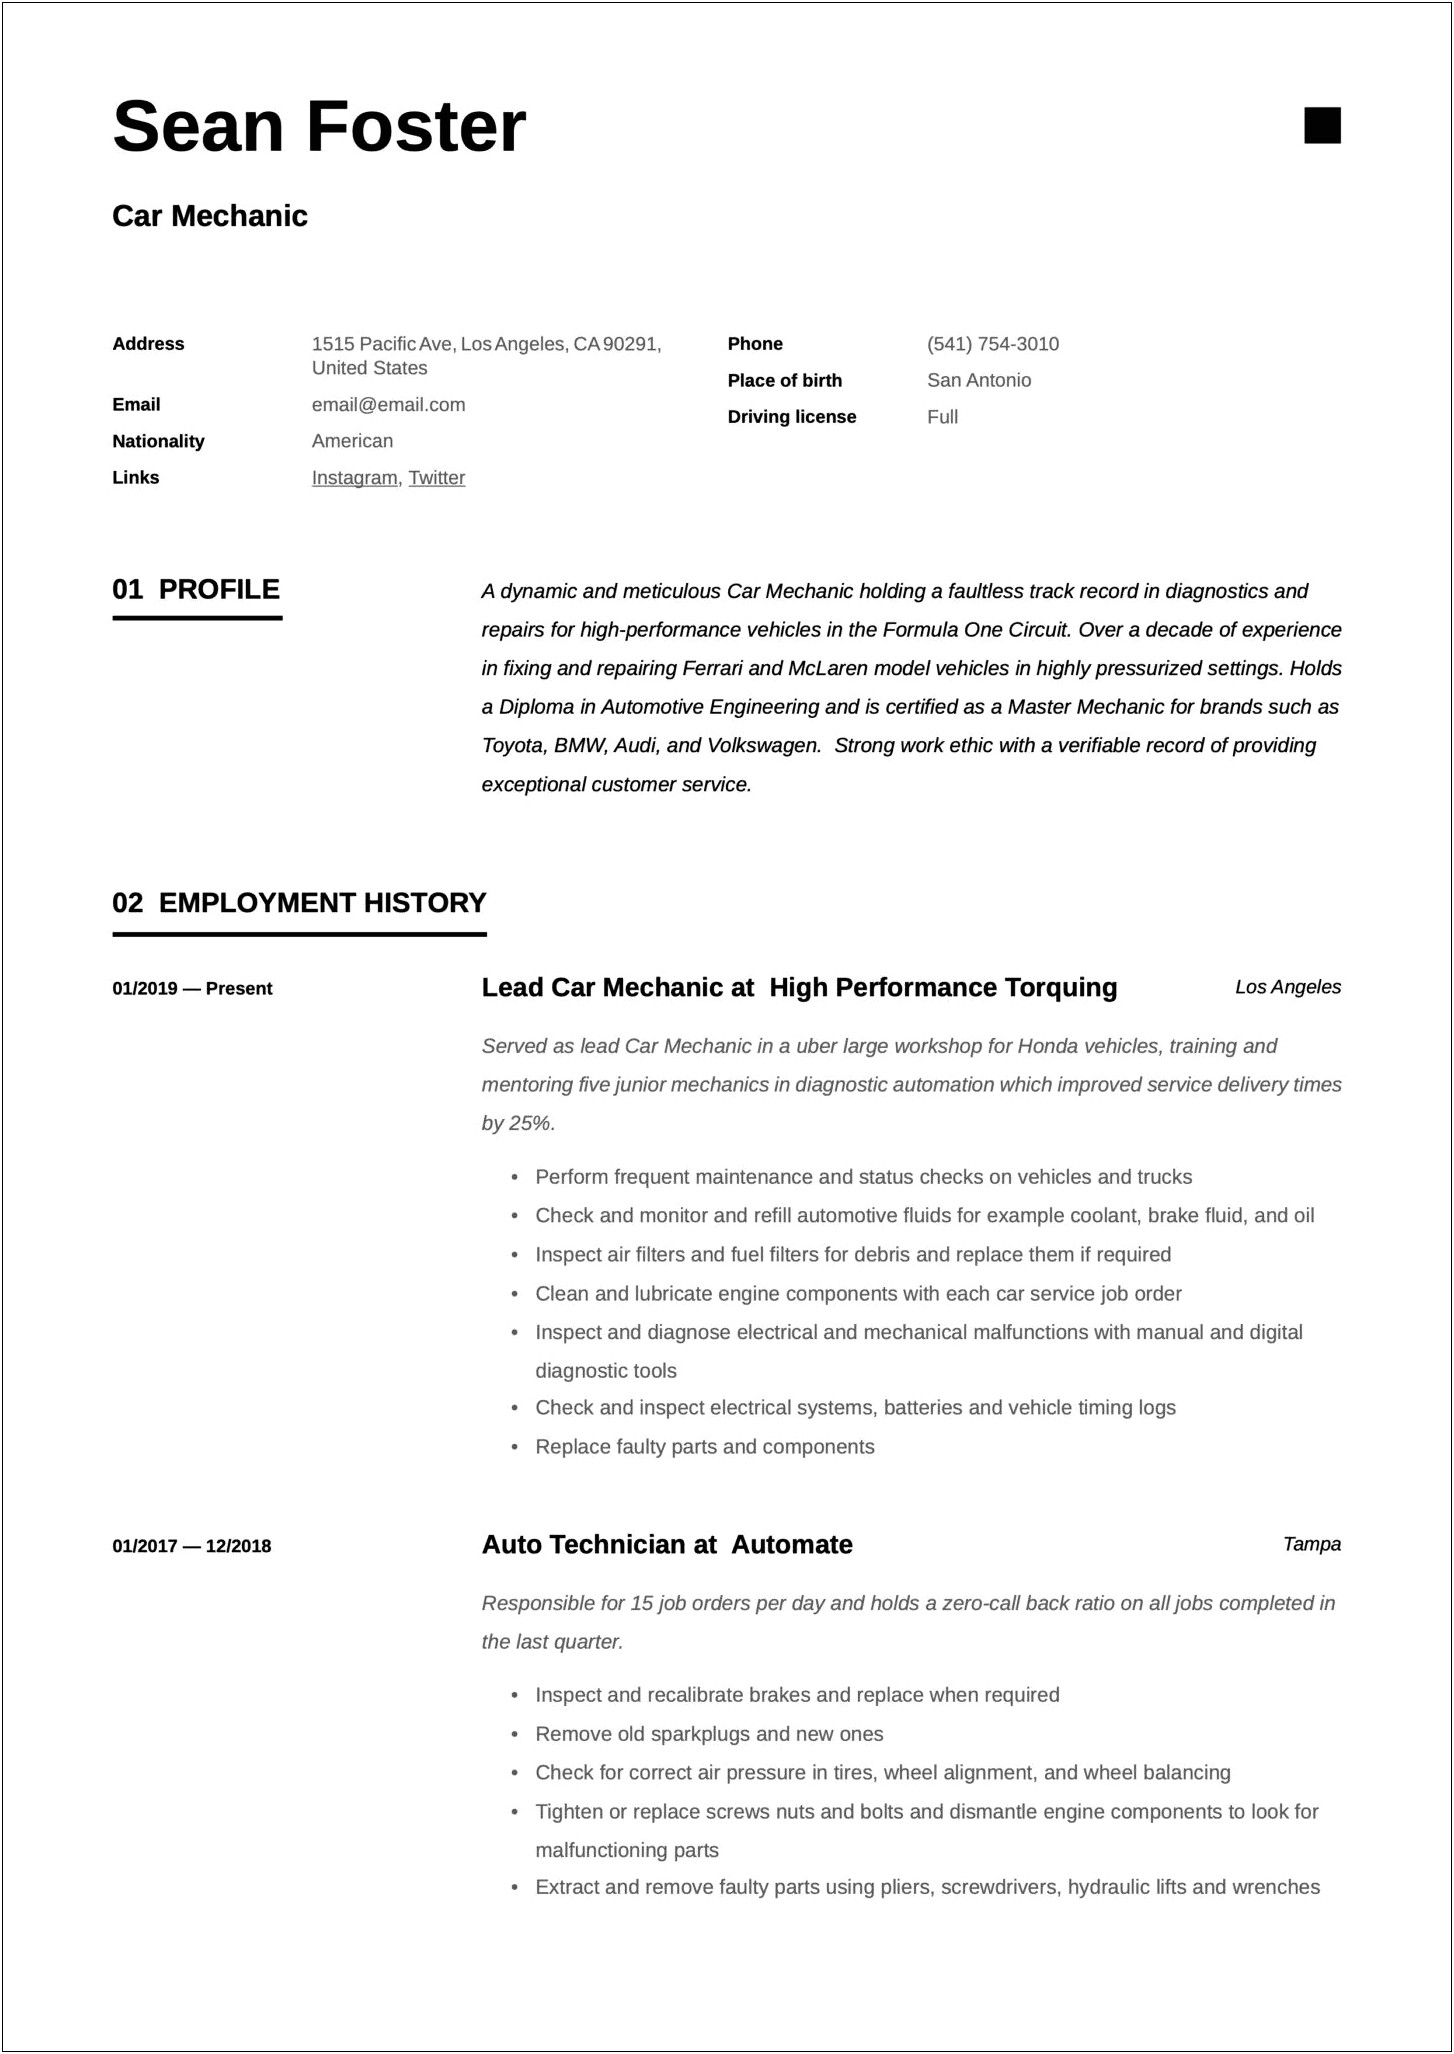 Resume With Career Change Mechanic Skills To Office